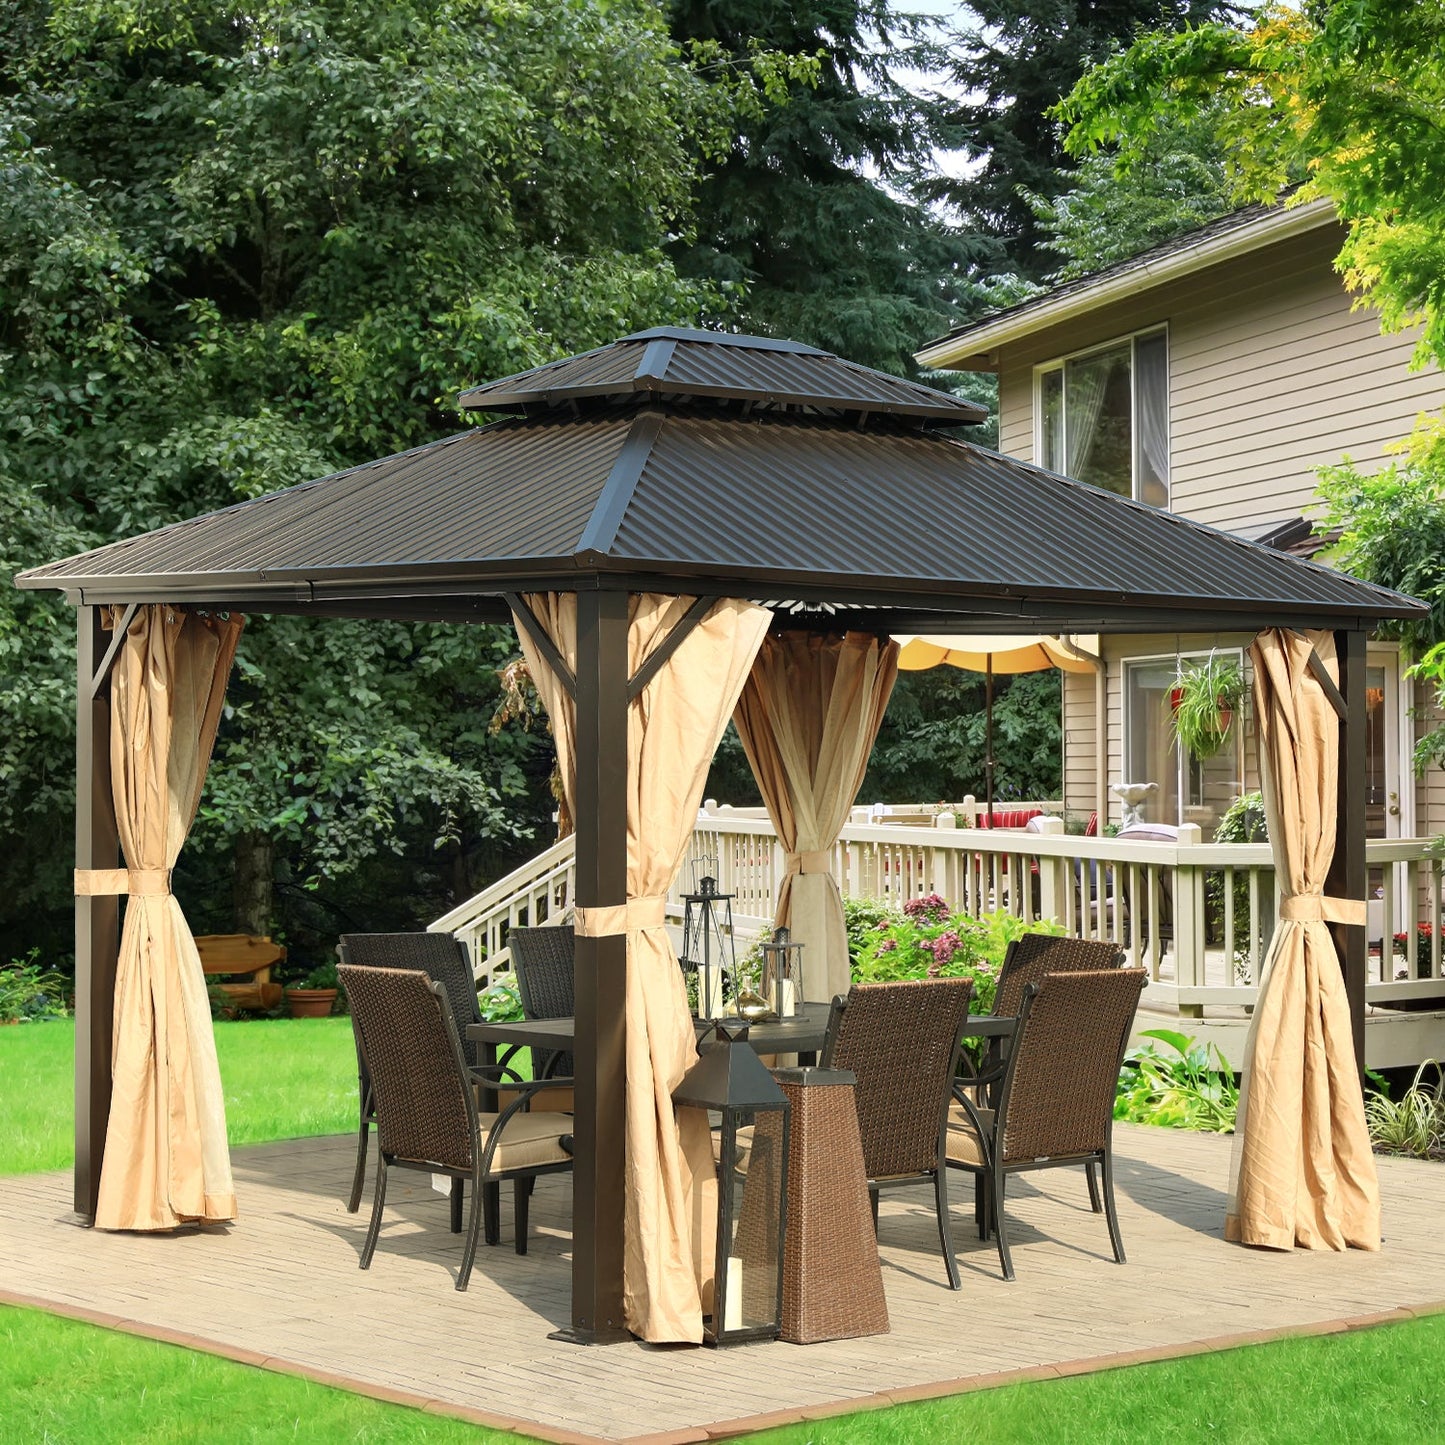 12 x 10 ft. Aluminum Frame Hardtop Roof Gazebo, Outdoor 2-Tier Metal Roof Gazebo with Mosquito Netting and Curtains - Black Gazebo Aoodor LLC   